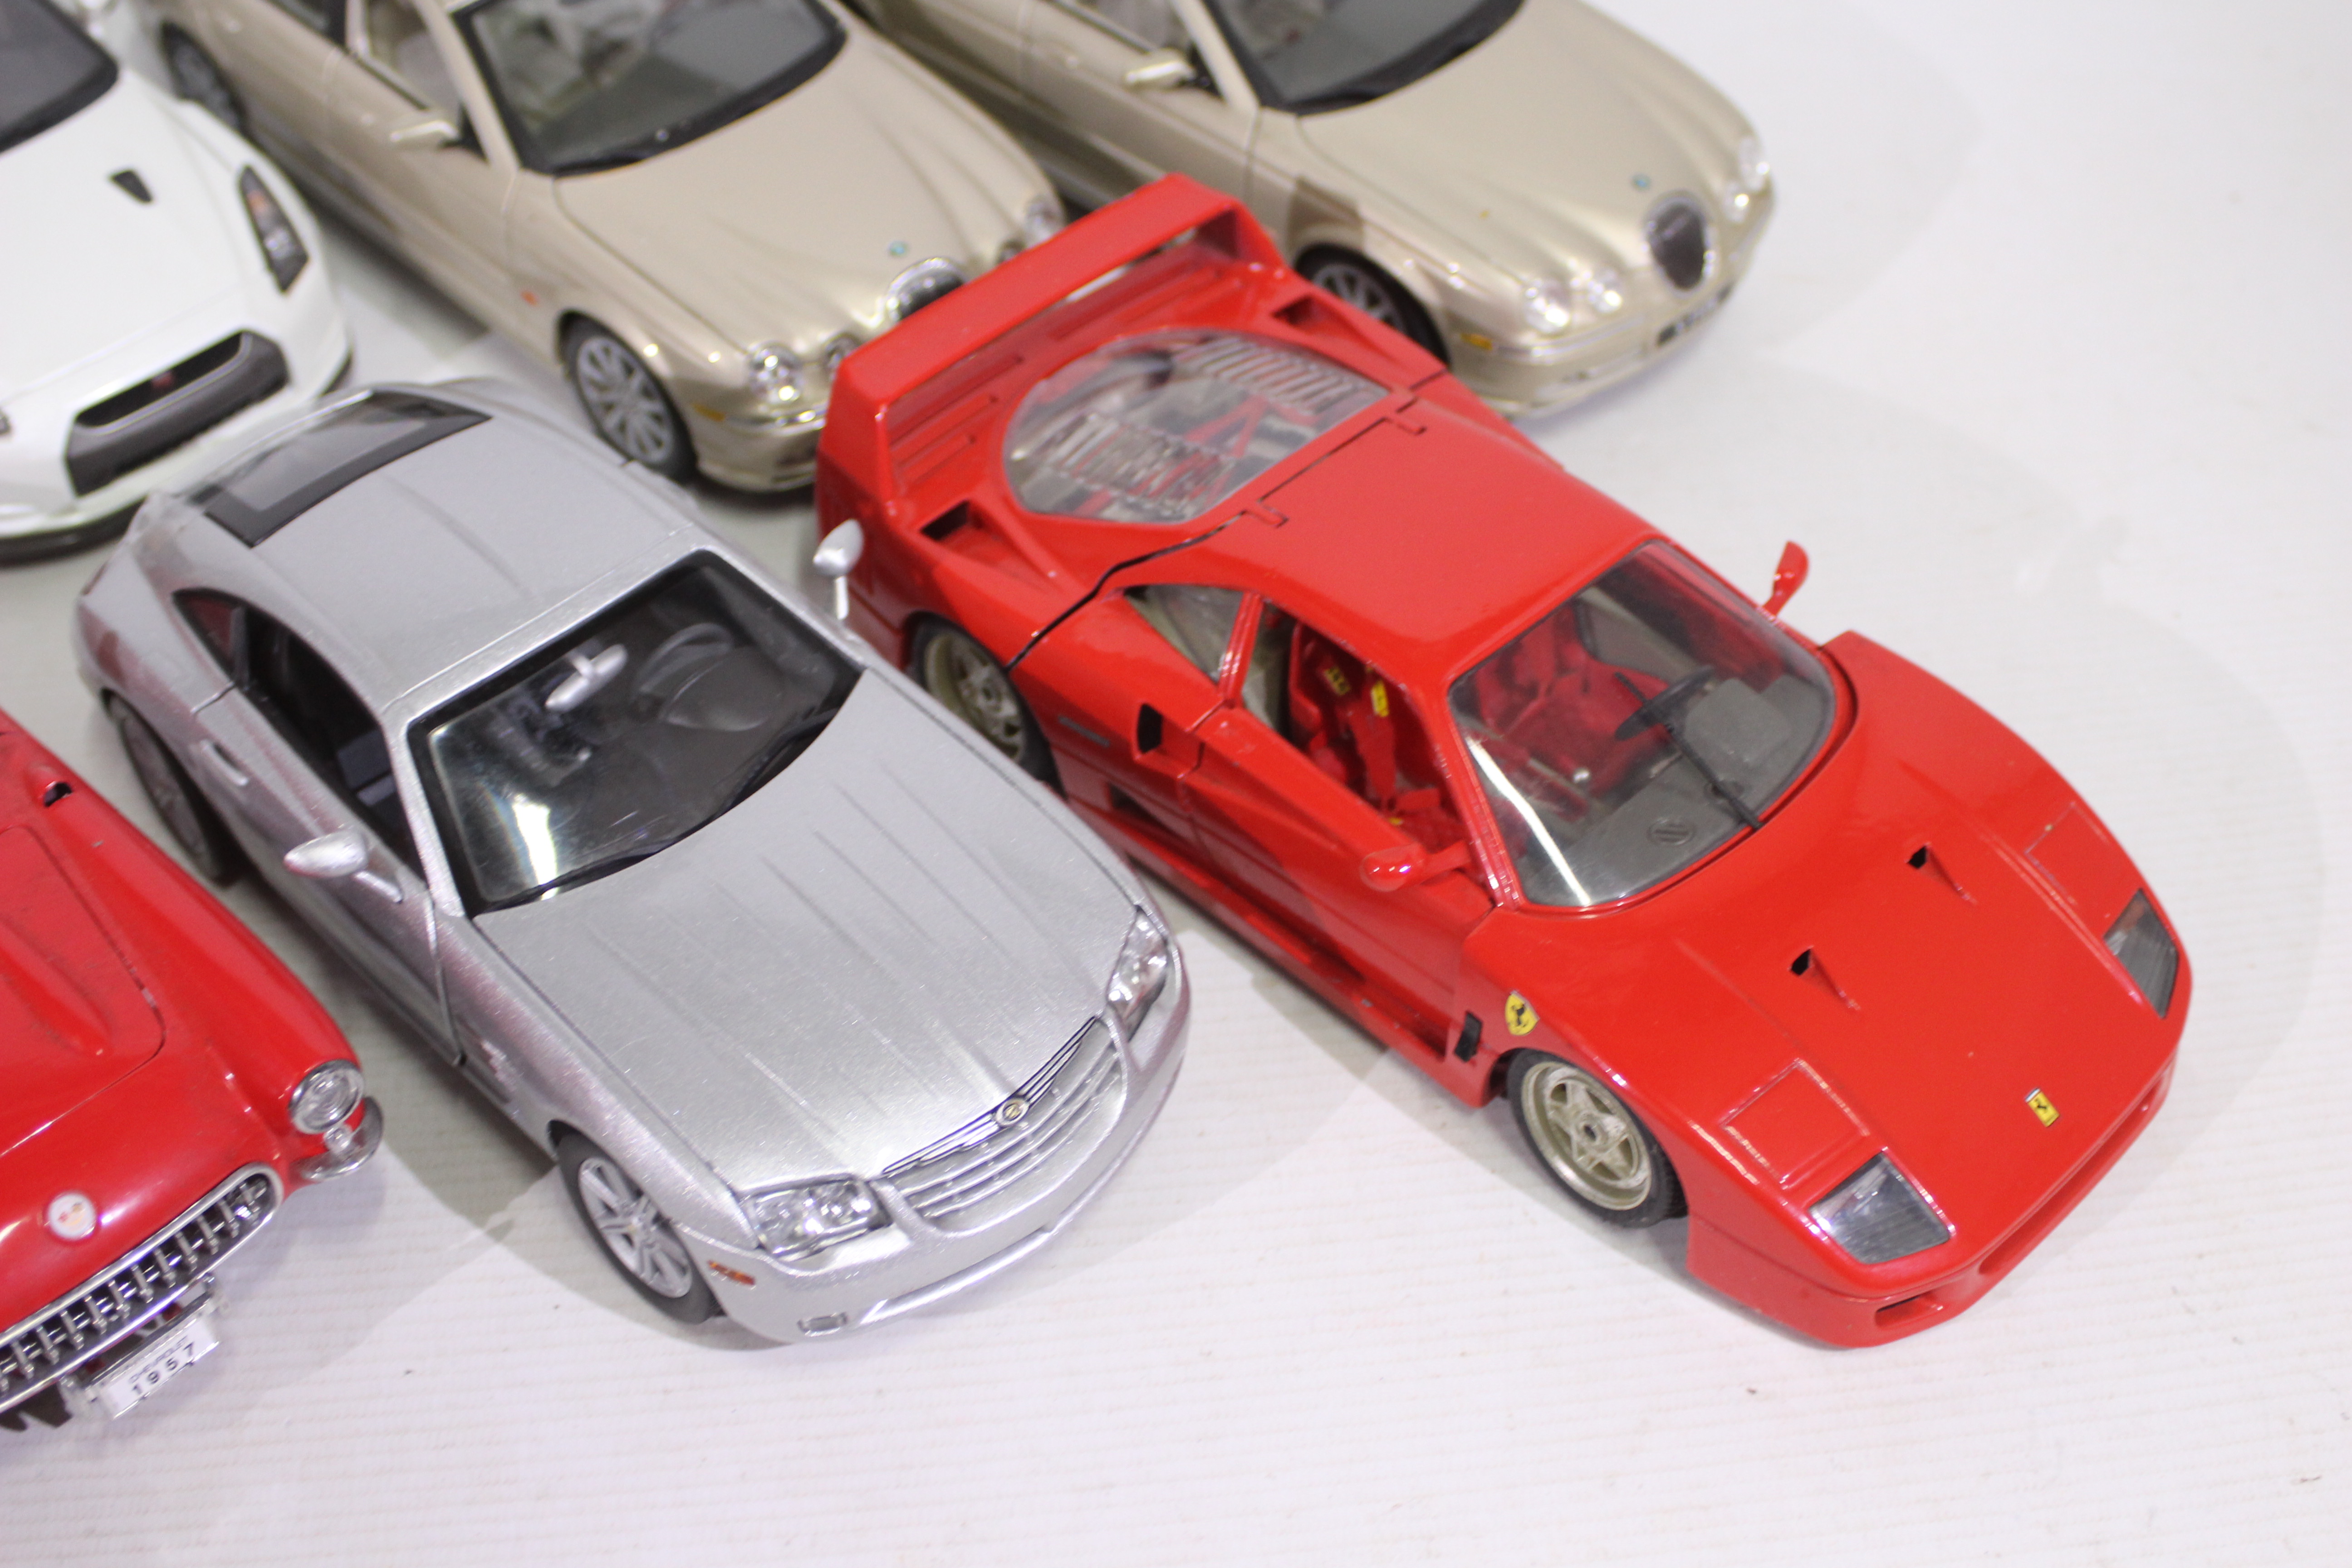 Maisto - Bburago - Motor Max - 8 x unboxed cars in 1:18 scale including Nissan GT/R, Porsche 356B, - Image 3 of 3